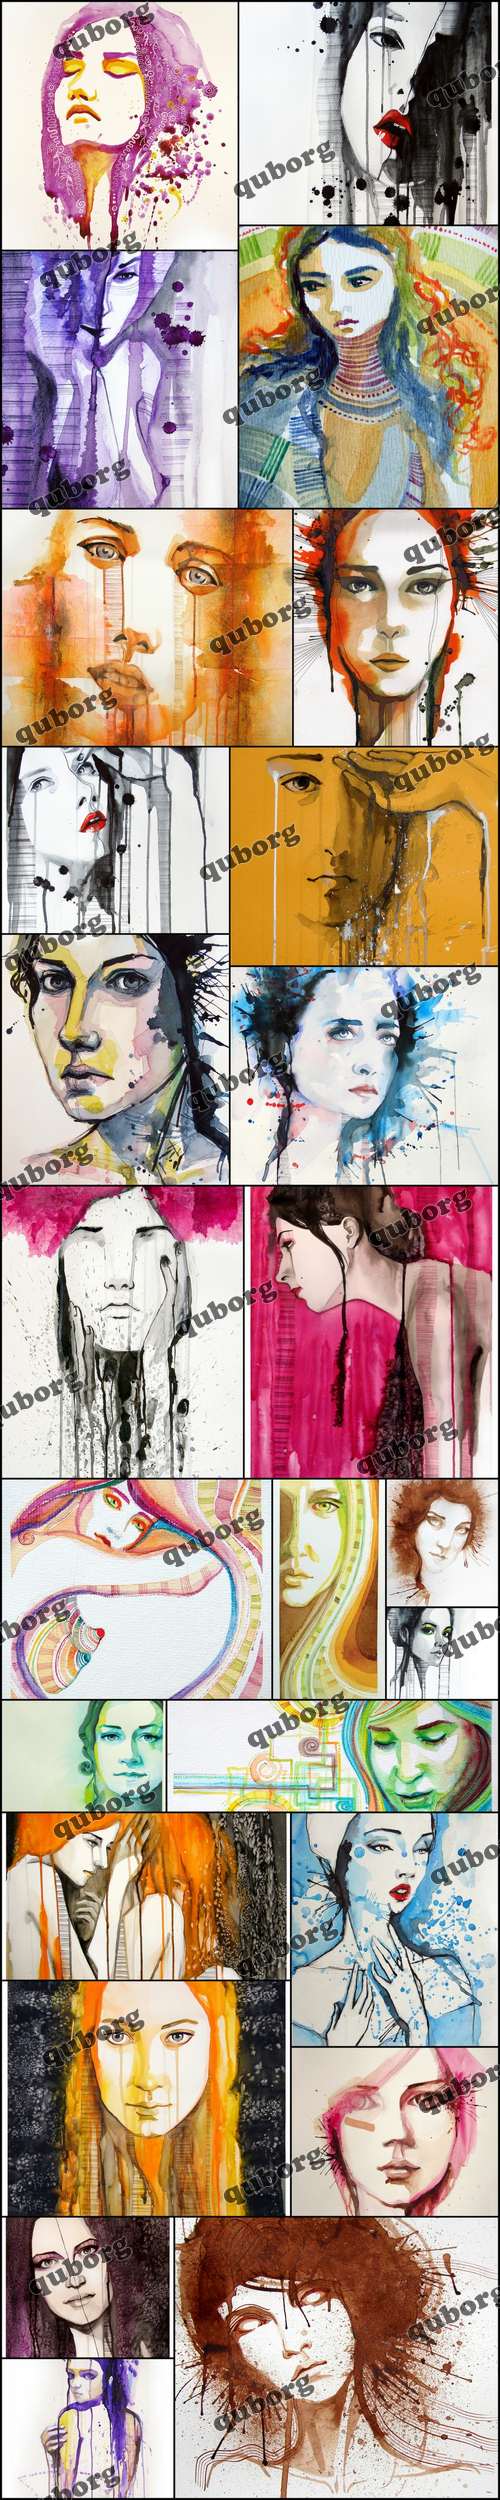 Stock Photos - Watercolor Portraits of Girls